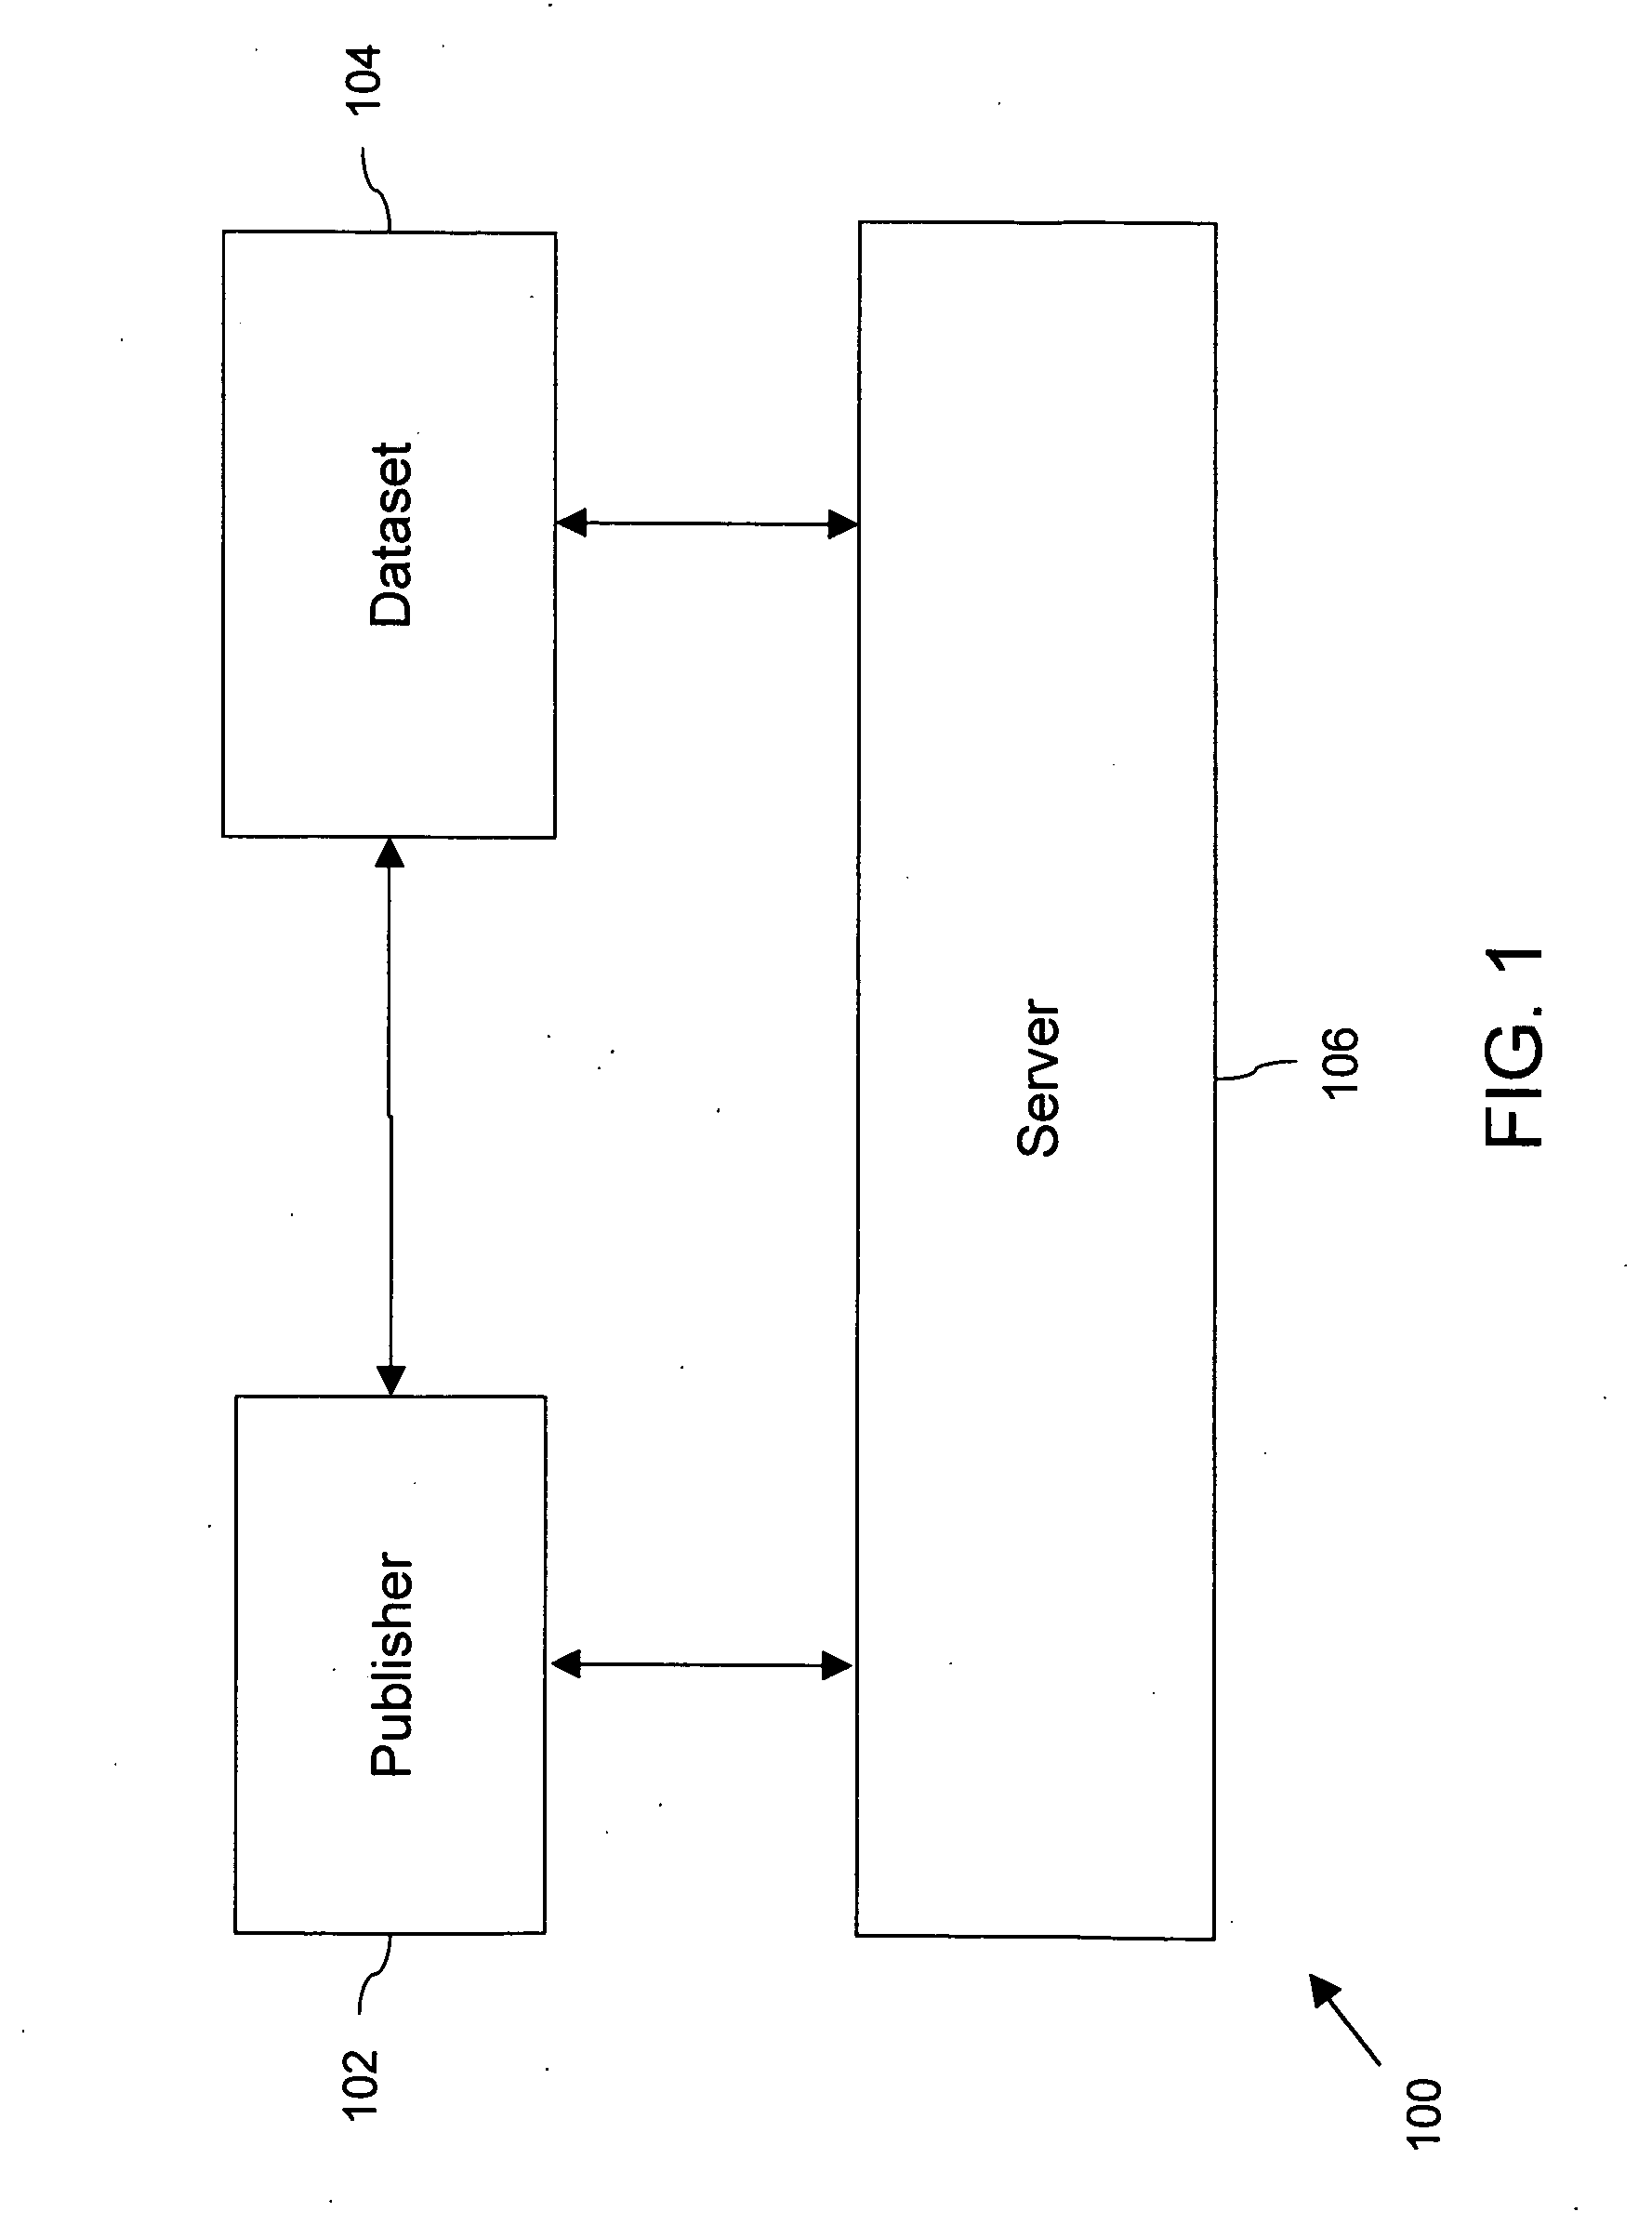 Method for providing access to information in a network